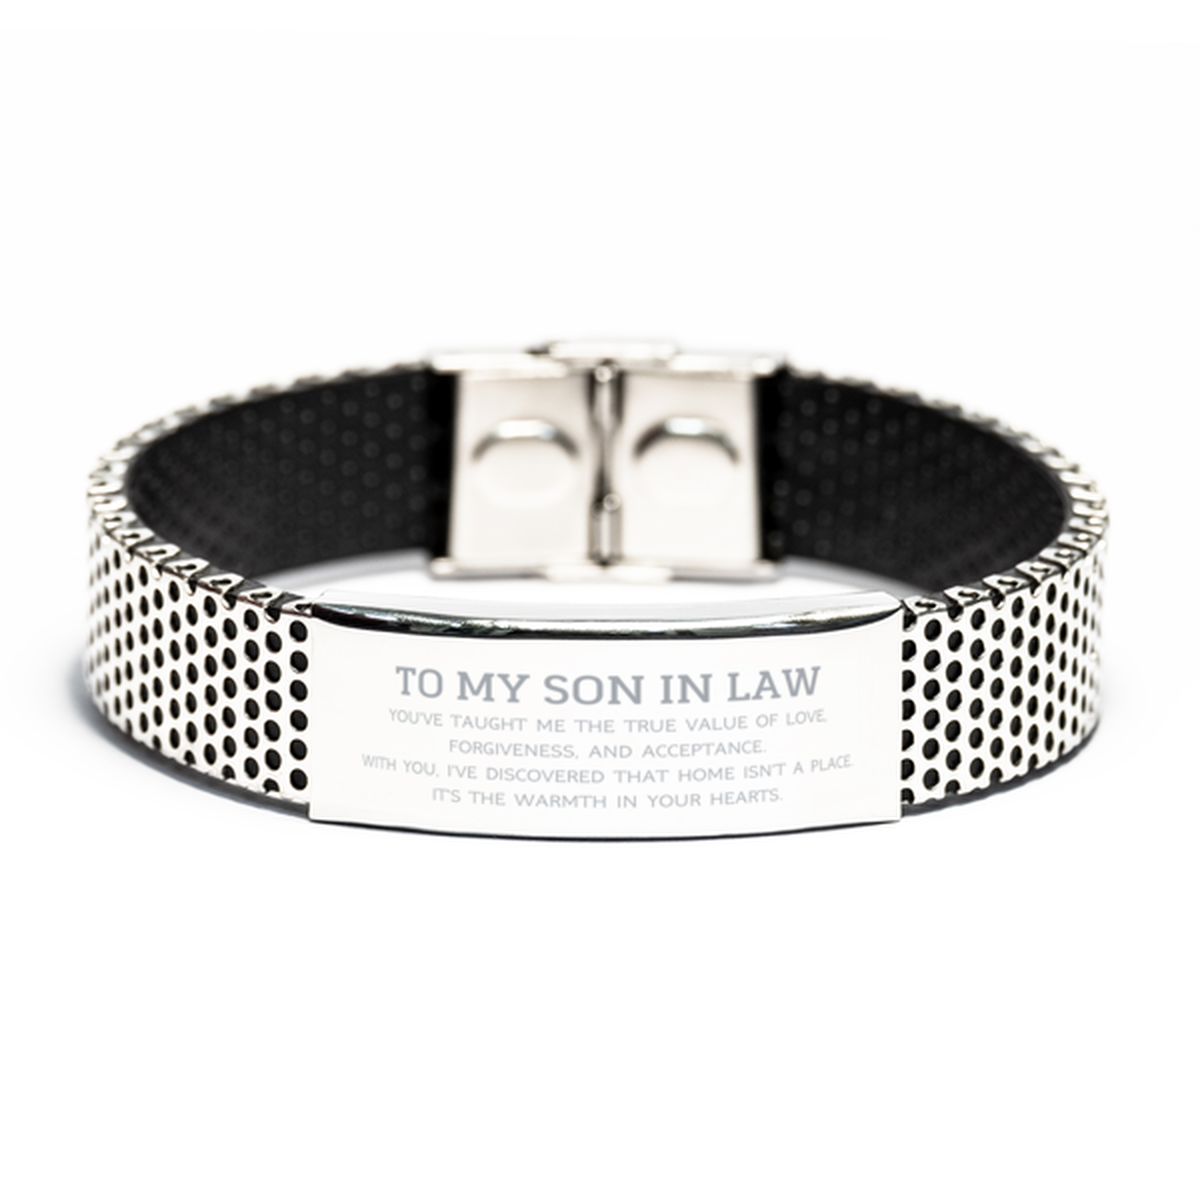 To My Son In Law Gifts, You've taught me the true value of love, Thank You Gifts For Son In Law, Birthday Stainless Steel Bracelet For Son In Law